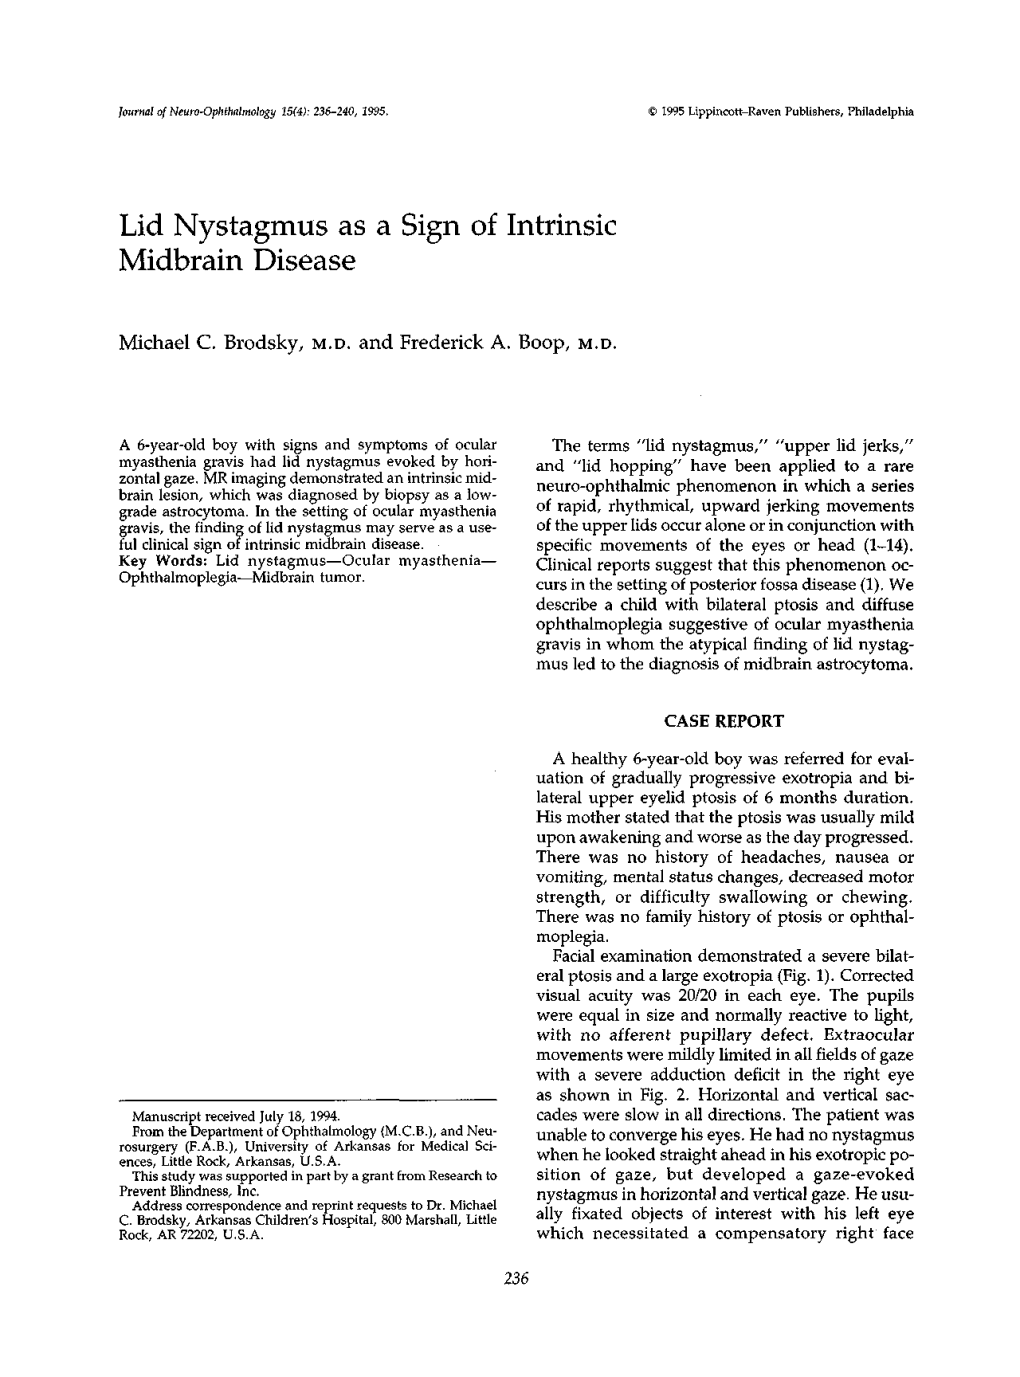 Lid Nystagmus As a Sign of Intrinsic Midbrain Disease